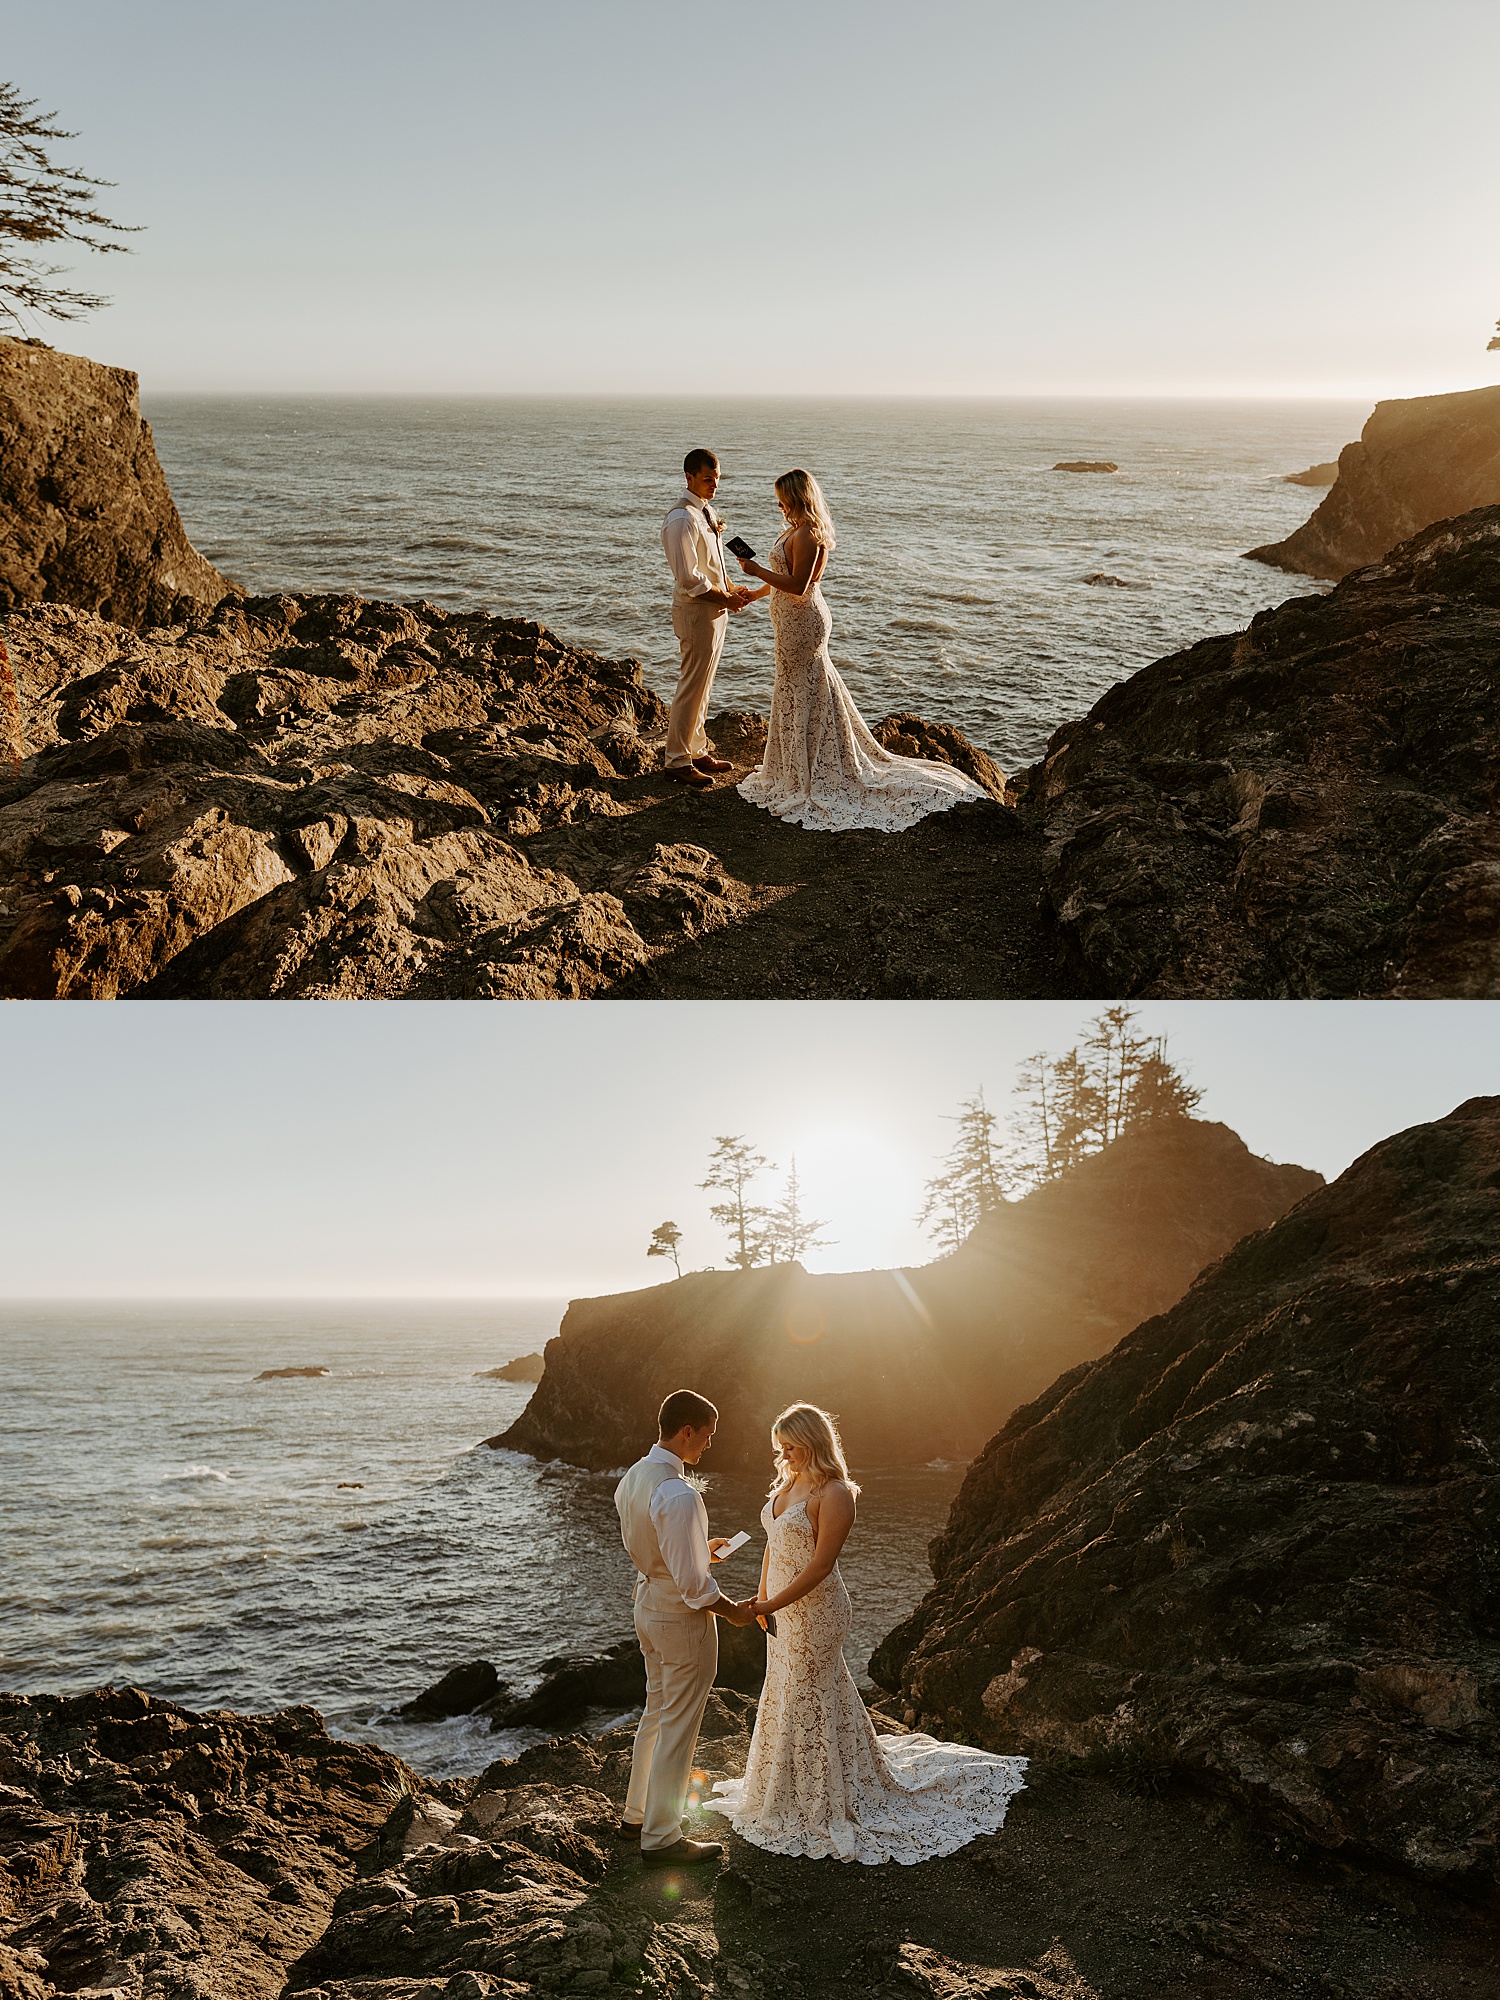 Private vows on the California Coast at sunset